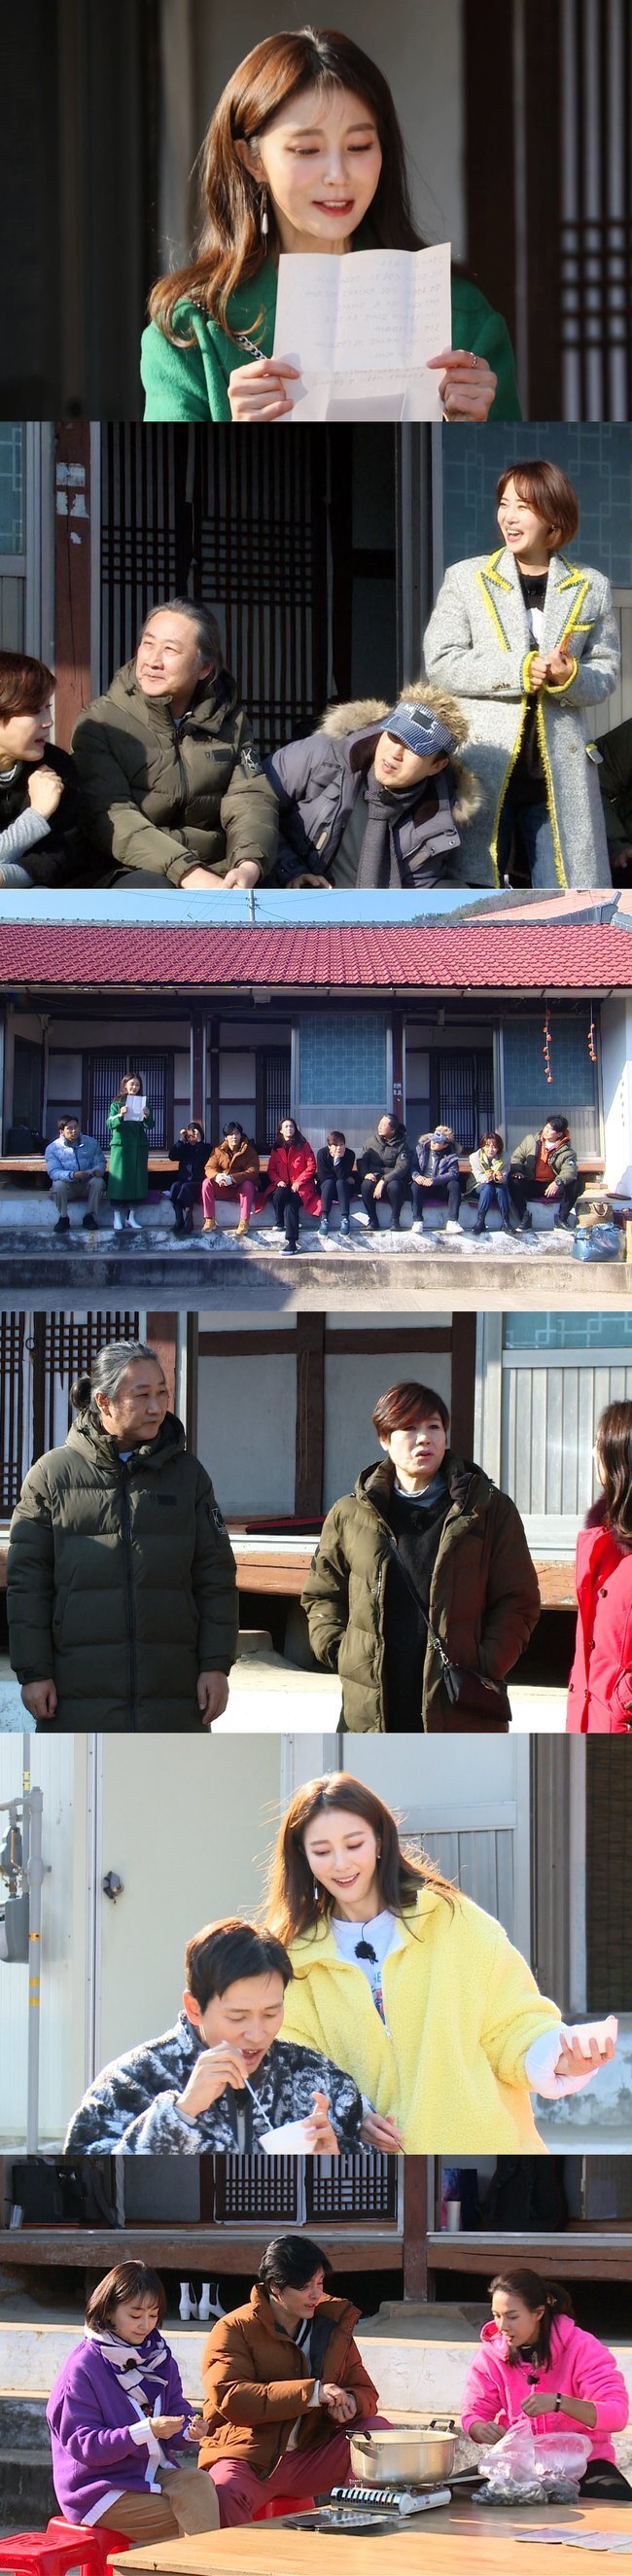 The surprise fortunes of young people who are celebrating the New Year are revealed.The youths left for Daejeon Metropolitan City, which is the first destination for the new year, with a magnificent Daecheong Lake.The youths who met for a long time since the special feature at the end of last year felt a sense of exacerbation as they recalled the 2021 figure they expected when they were young.On this day, the production team handed a suspicious letter to the youths full of the excitement of the new year.The three letters that I handed to the Dosa of Questions, which contained the fortunes of youth this year, focused everyones attention.First of all, in the first letter, Lee Yeon-soo, Kang Kyung-heon, and Ahn Hye-Kyung were all over the place.The three people who were identified as the viewing rate fairy admired the spirit of the master.One young man who received another letter was a windbreaker, but the love affair was made to be crowded from the new year by receiving a factual violence fortune called the eagle workshop.It is the back door that laughed when he handed out comfort (?) that the youth next to him only needed wealth.Meanwhile, the hot love story of At the request representative official couple aunt Shin Hyo-bum and aunt Kim Do Kyun will be released.Finally, Hyobum, who appeared, found Dogyun as soon as he arrived and set fire to his aunt & aunt love line.The two men, who met in half a year after their last trip to Ganghwa Island, were telepathic with an unintended couple from the beginning.The youths who watched this could not hide their excitement when they saw the two people who had been reunited for a long time.In the preparation of the lunch, Hyobum and Dogyun continued to be.Hyobum, who was excited to see delicious dishes, called Dogyun Honey at the moment, and Dogyun, who heard it, could not hide his embarrassment and made the viewers feel great because he hit the barricade of the past.However, Hyobum does not give in to the ongoing defense, and he said, I only look at the germs.